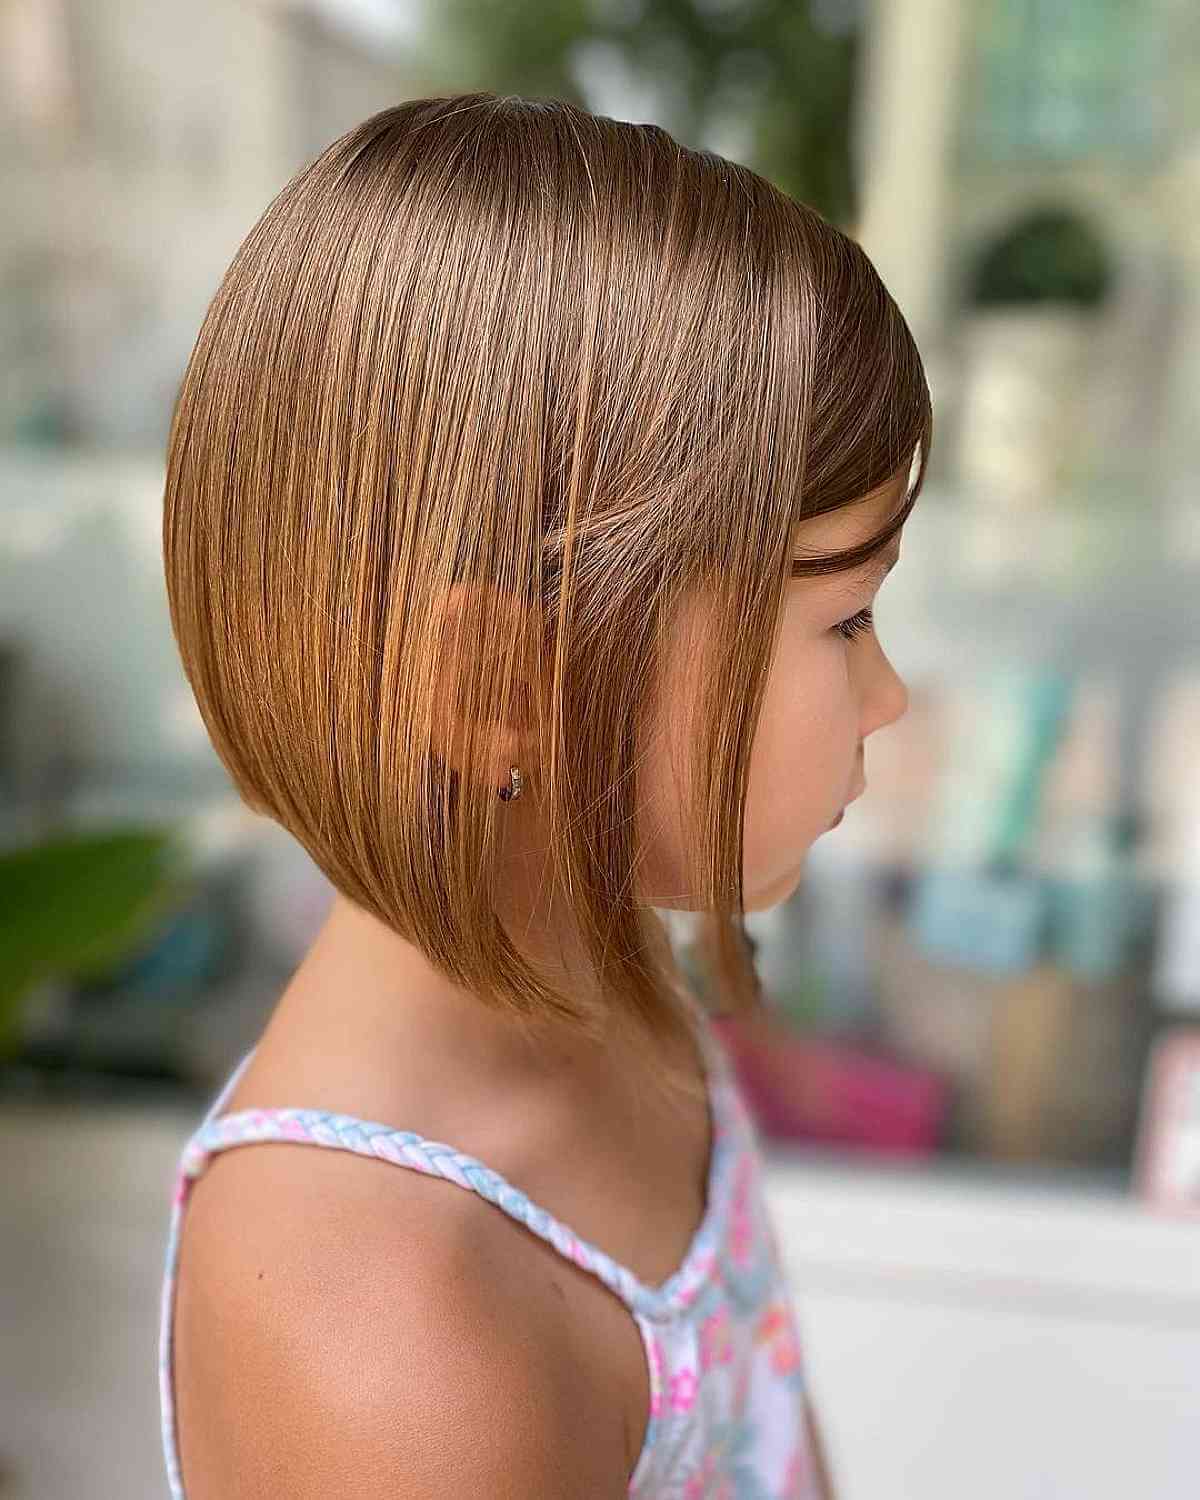 Hairstyle For Kids Girls Short Hair Top Sellers - www.puzzlewood.net  1695020229